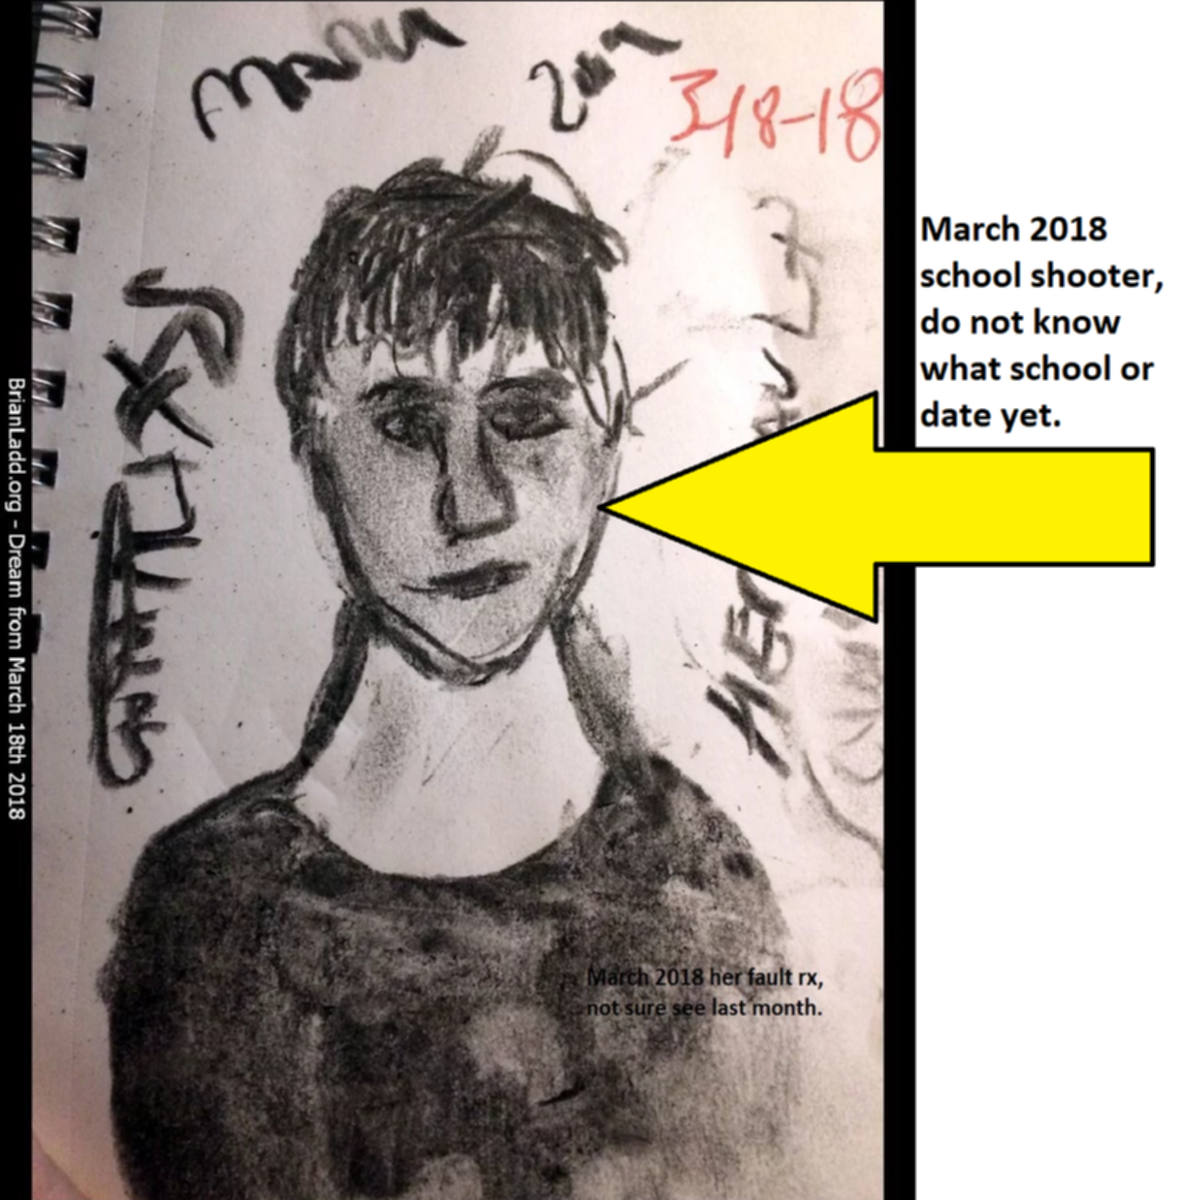 March 2018 school shooter2C do not know what school or date yet dream from March 17th 2018
March 2018 school shooter2C do not know what school or date yet dream from March 17th 2018
